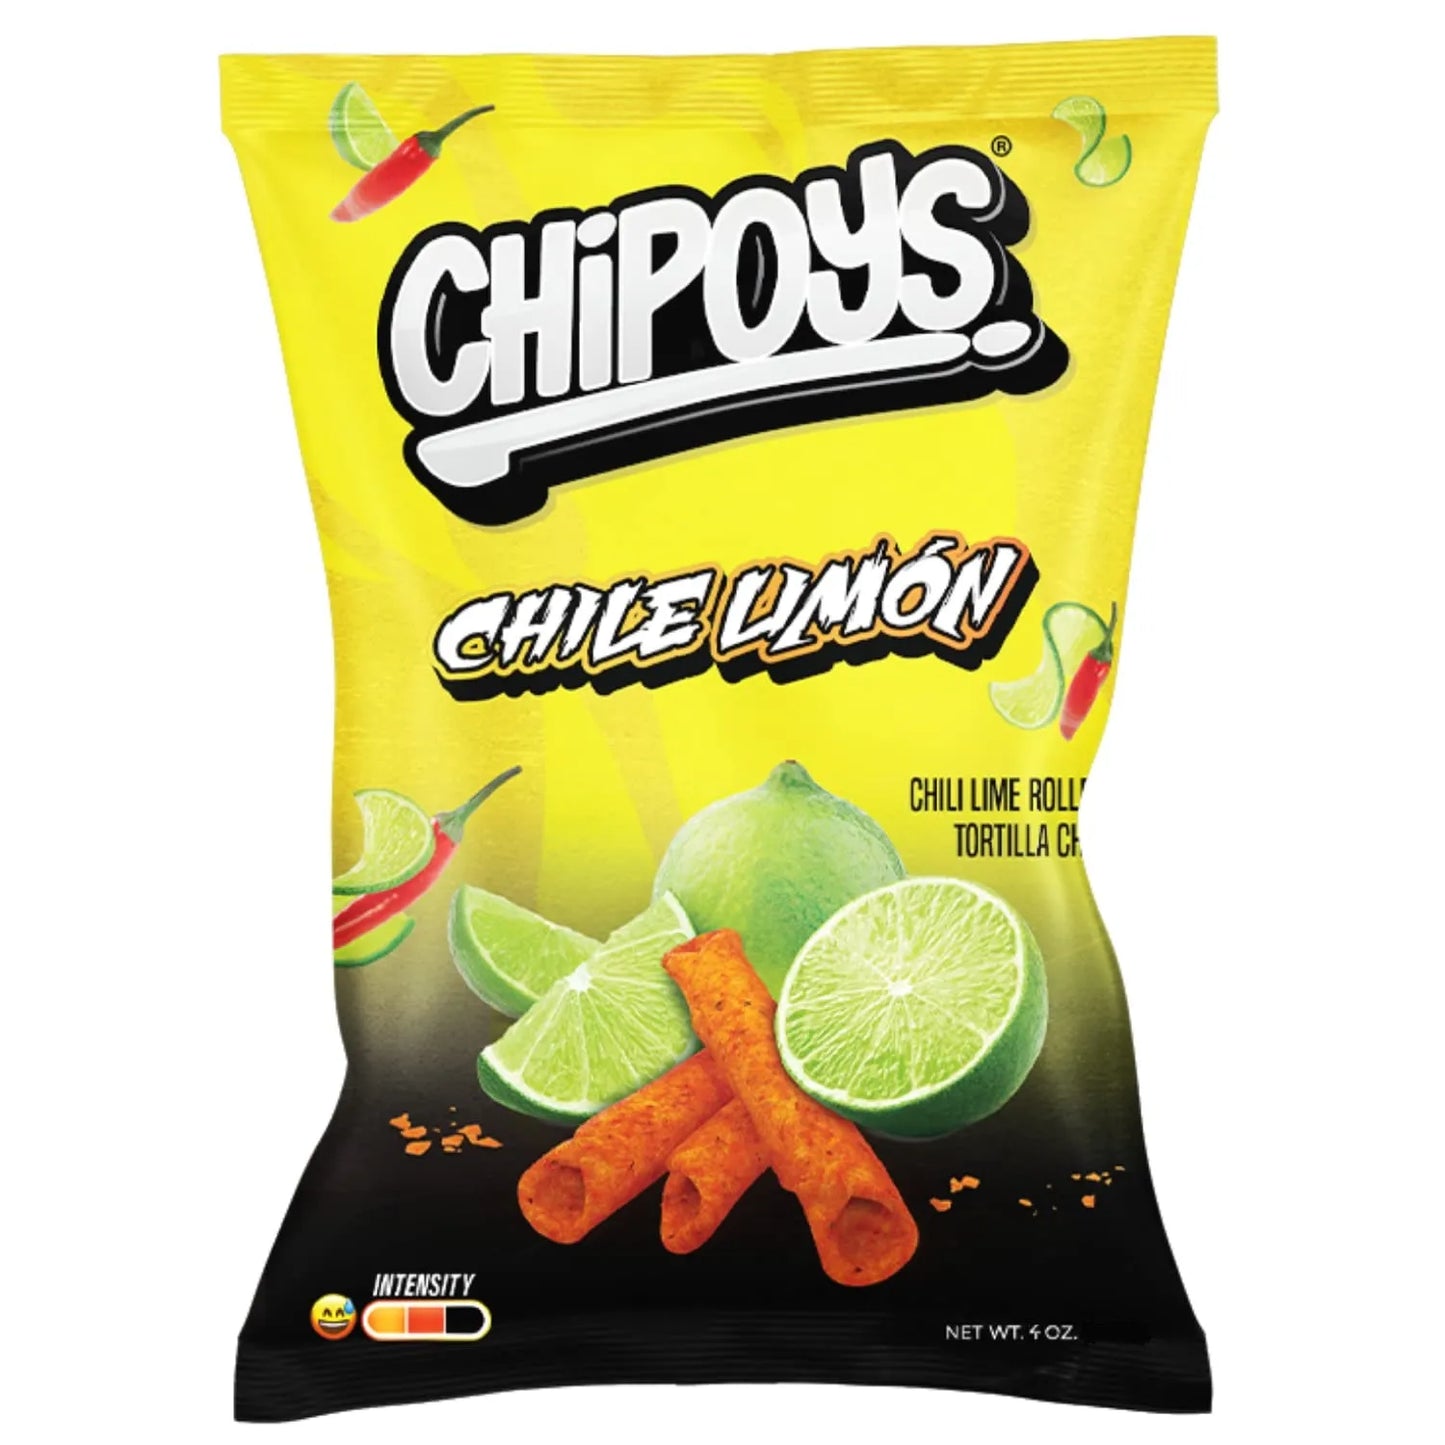 Chipoys Chili Lime Rolled Tortilla Chips